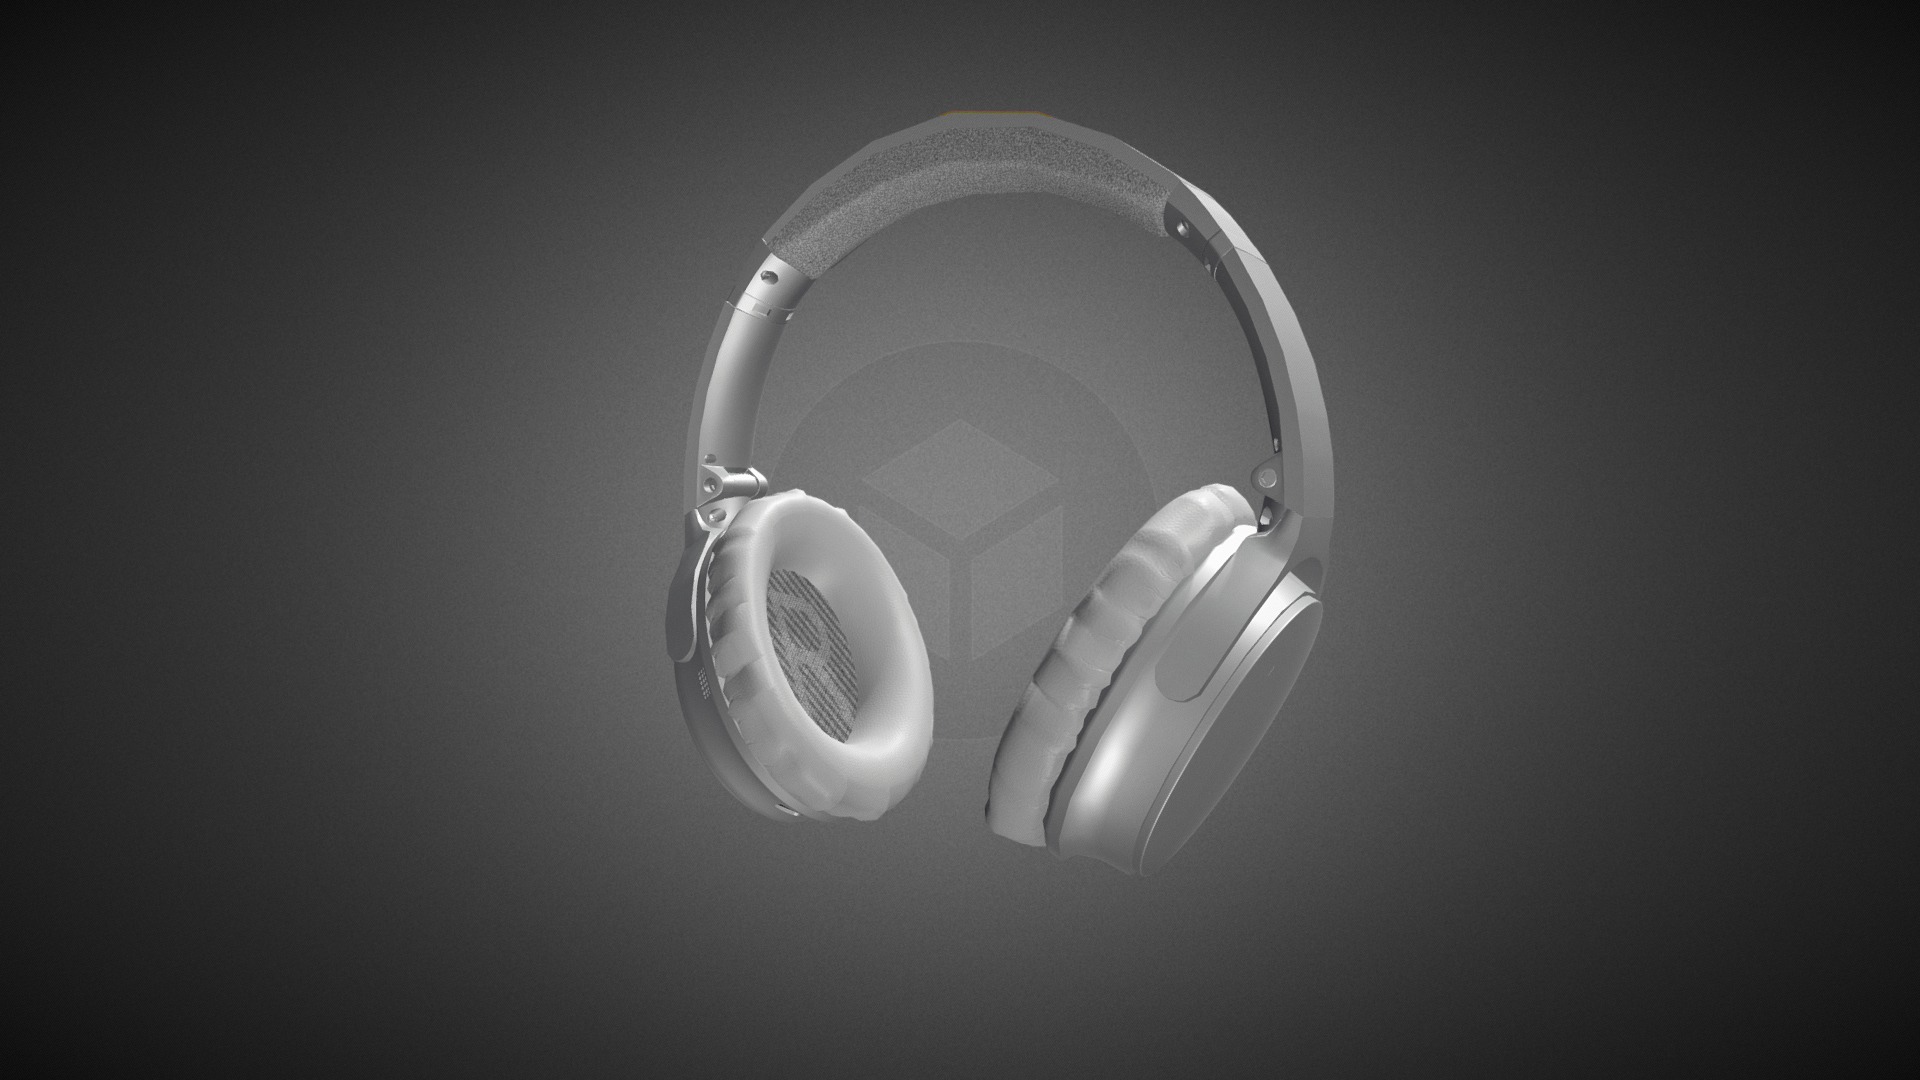 3D model Bose QuietComfort 35 for Element 3D - This is a 3D model of the Bose QuietComfort 35 for Element 3D. The 3D model is about a white headphone with a black background.